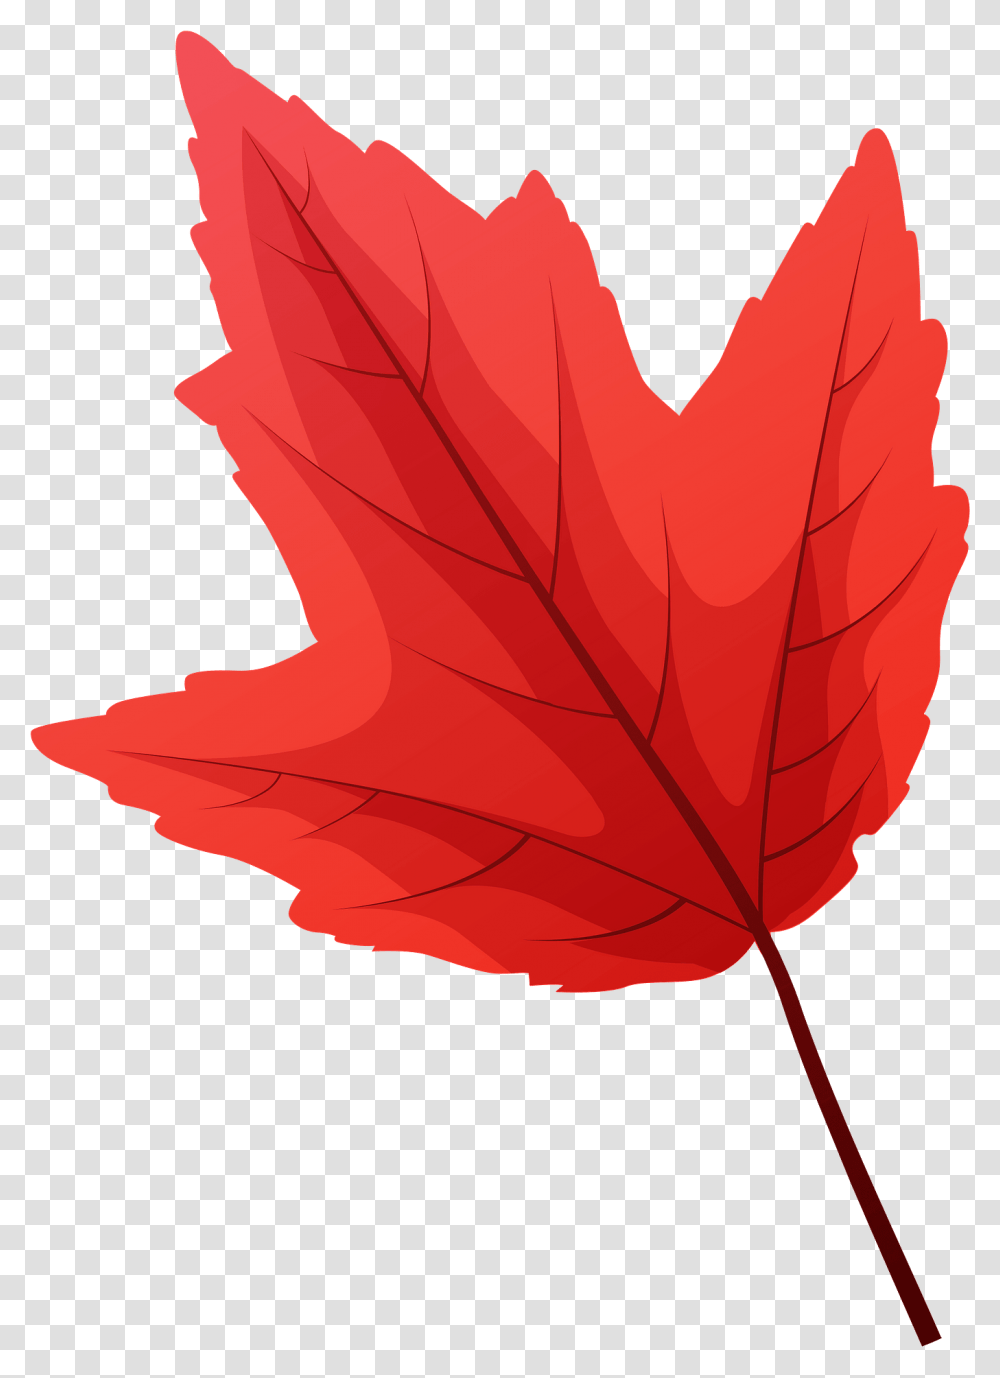 Red Maple Late Autumn Leaf Clipart Free Download Clipart Autumn Leaf, Plant, Tree, Maple Leaf Transparent Png